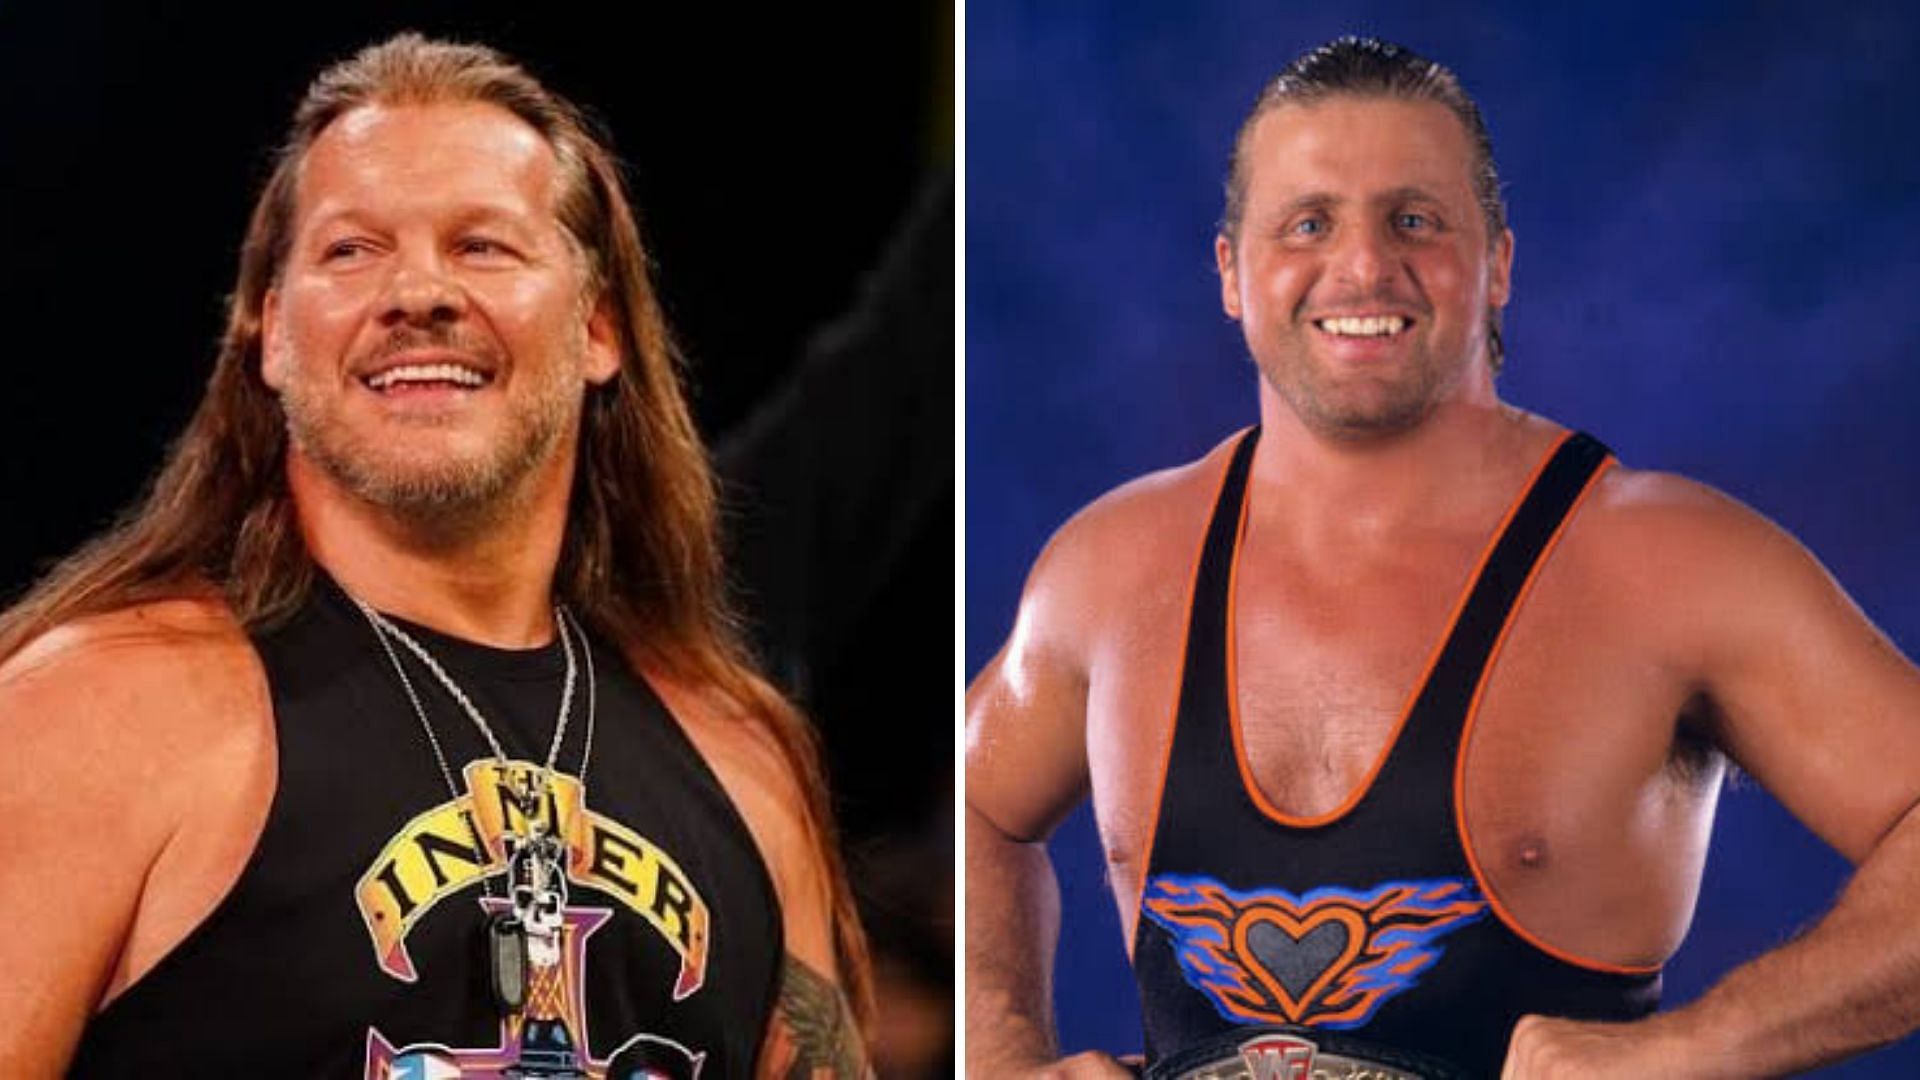 Jericho and Owen Hart never crossed paths in their wrestling careers